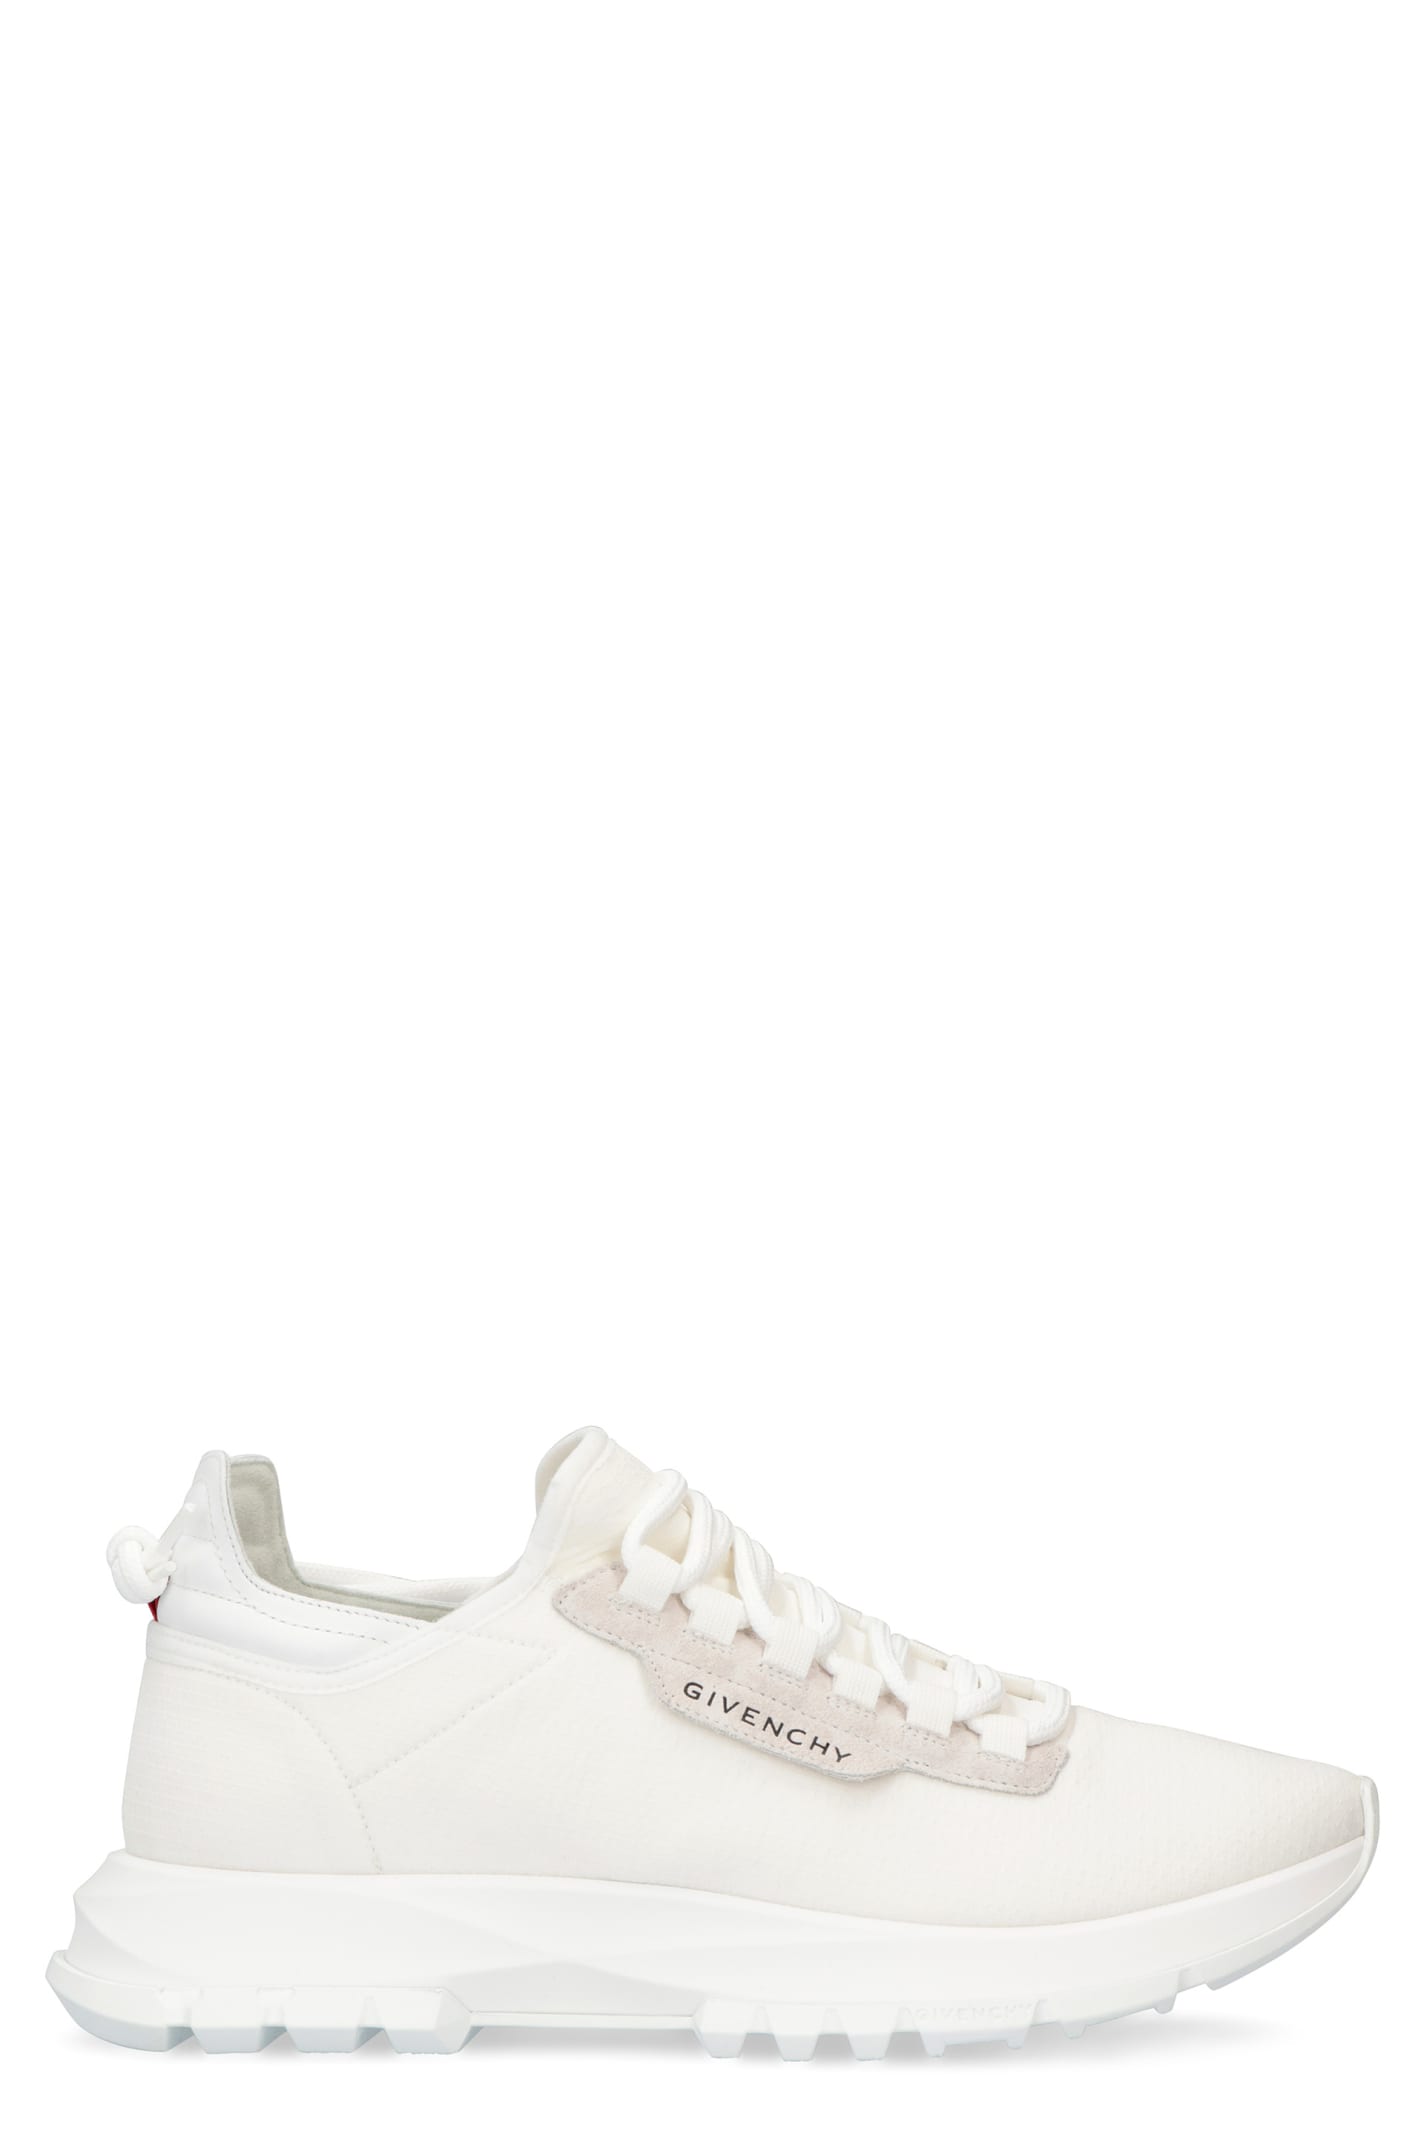 Buy Givenchy Spectre Low-top Sneakers online, shop Givenchy shoes with free shipping